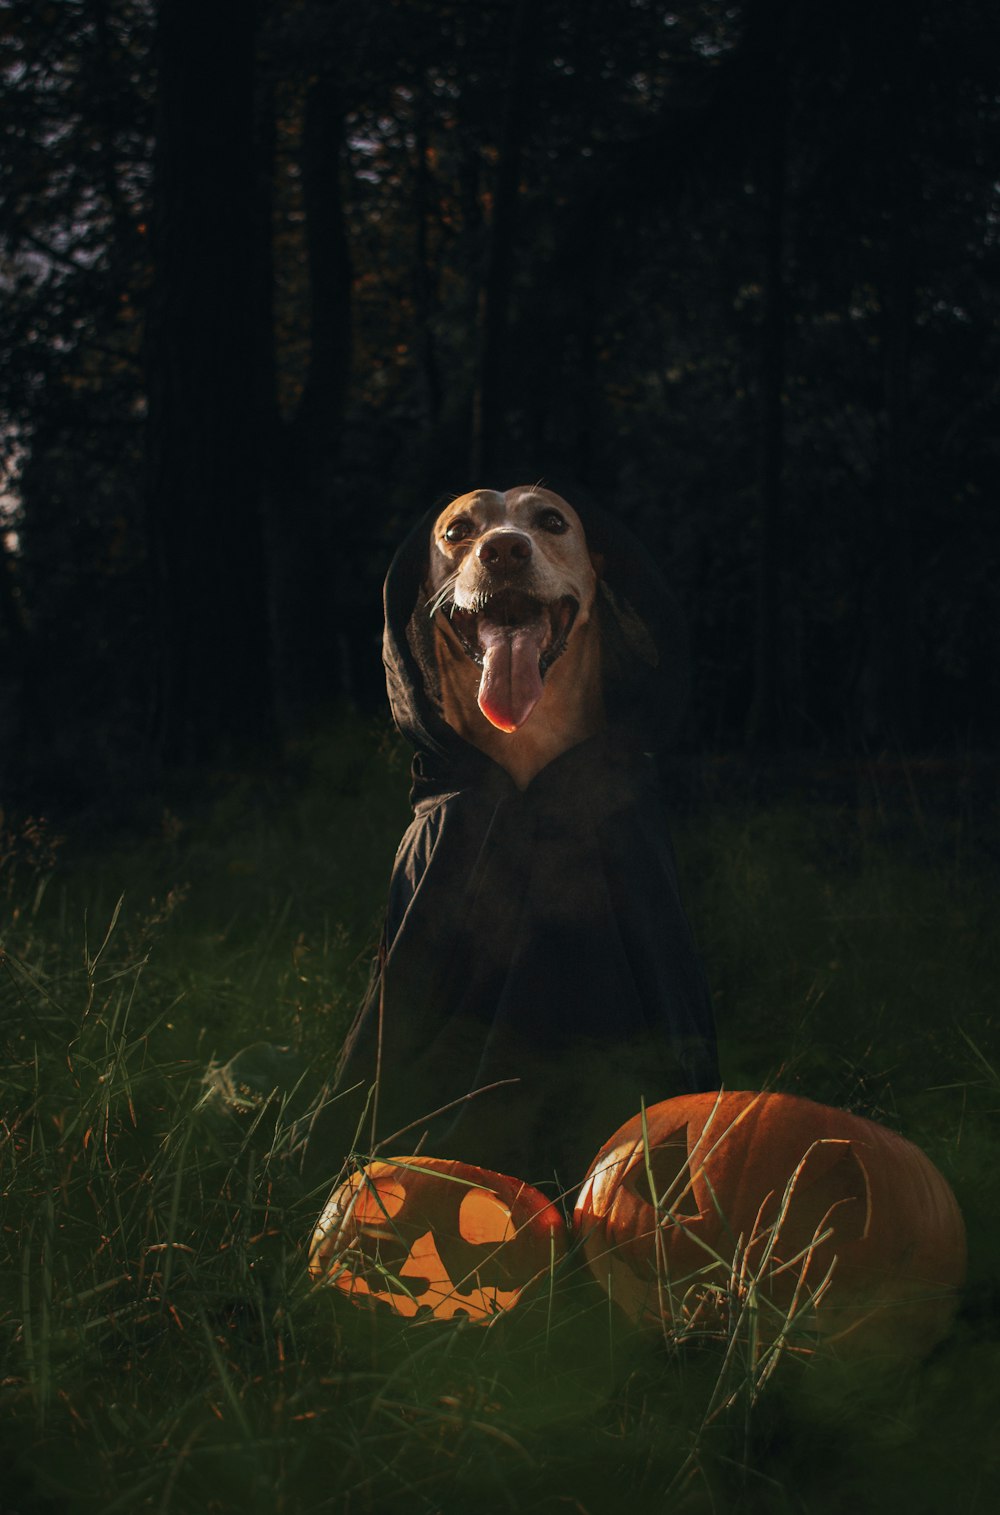 a dog sitting in grass with a pumpkin in front of it